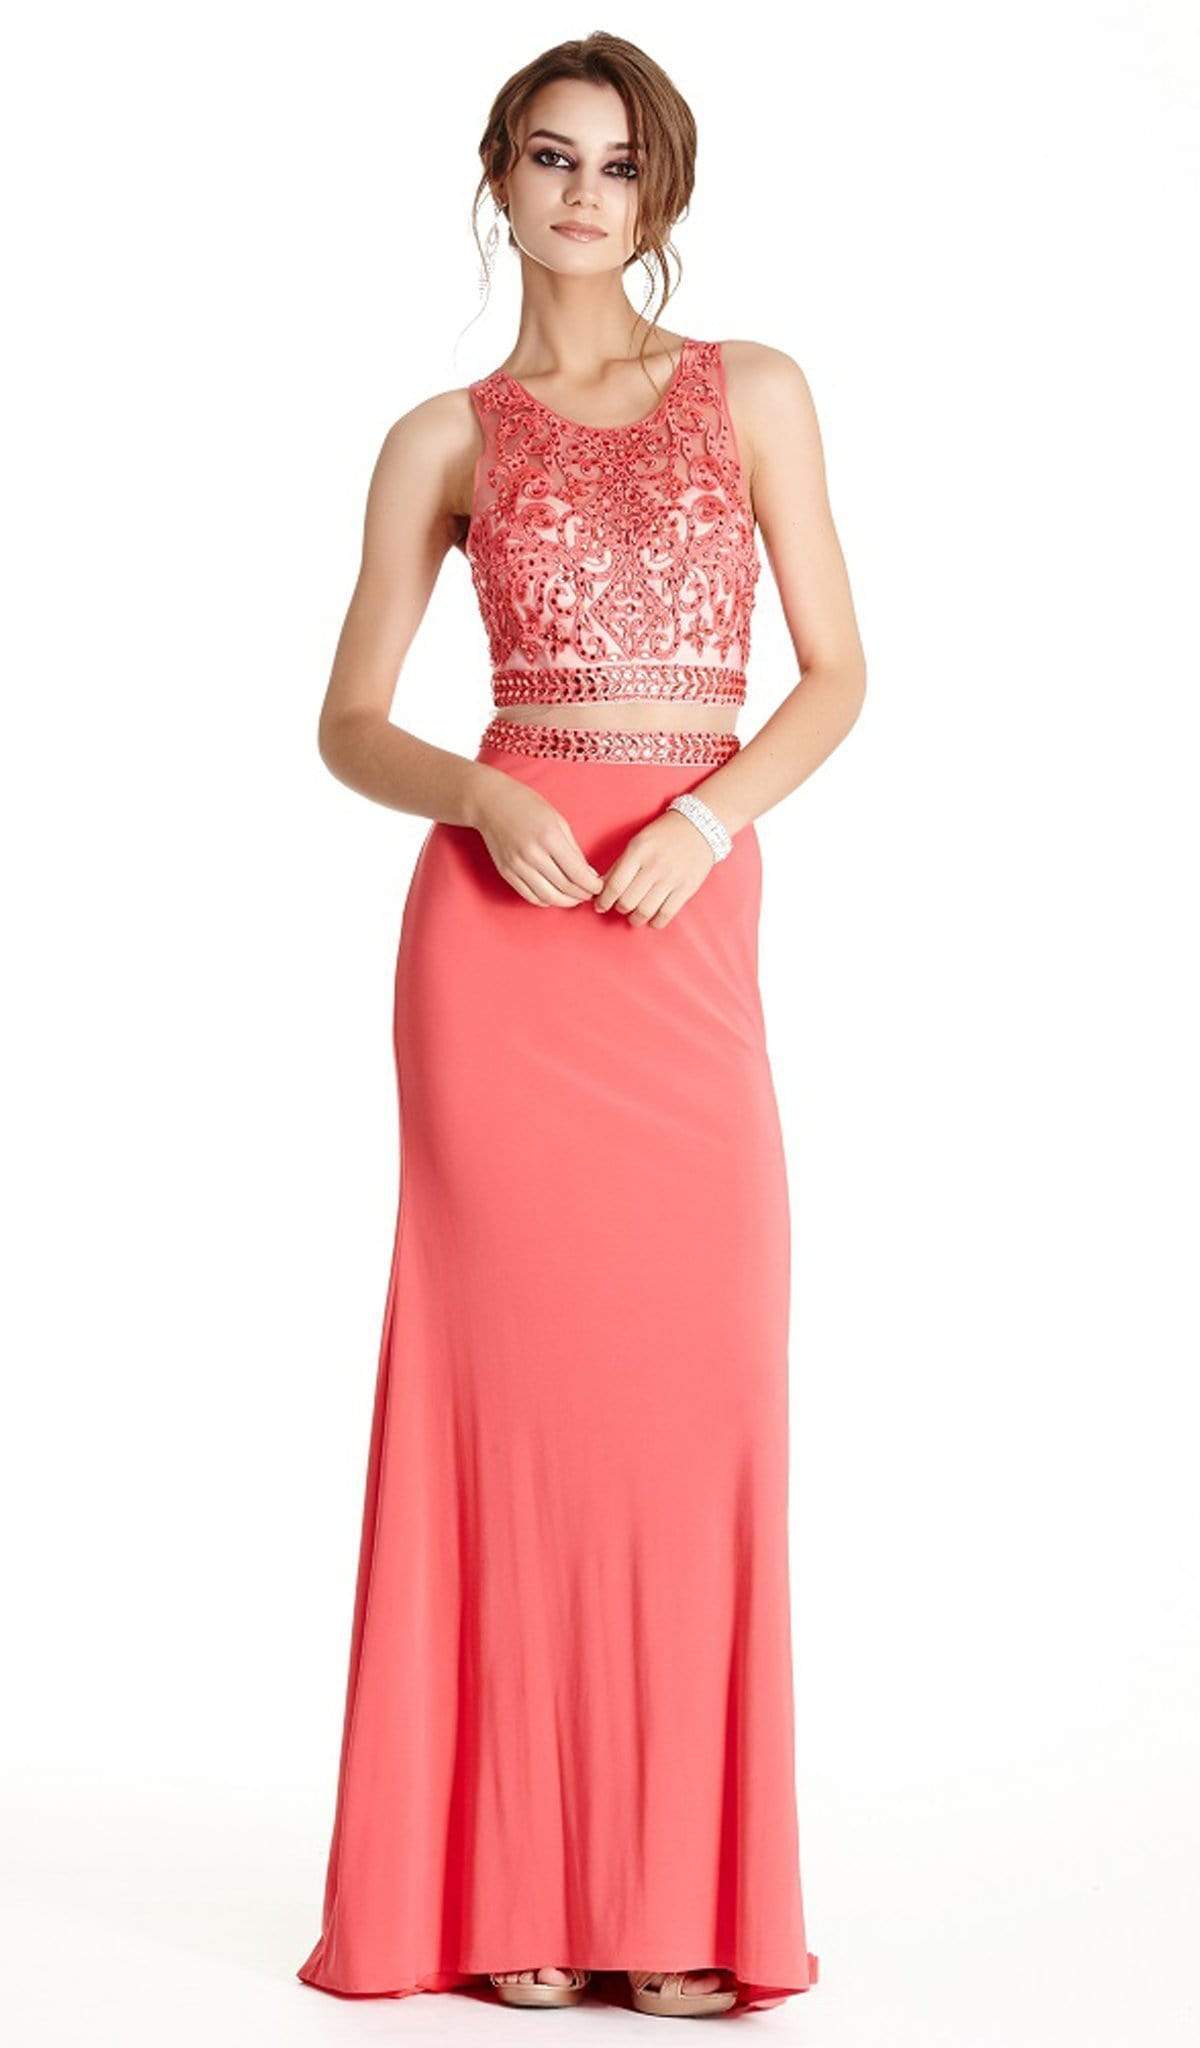 Aspeed Design - Embellished Mock Two Piece Fitted Prom Dress
